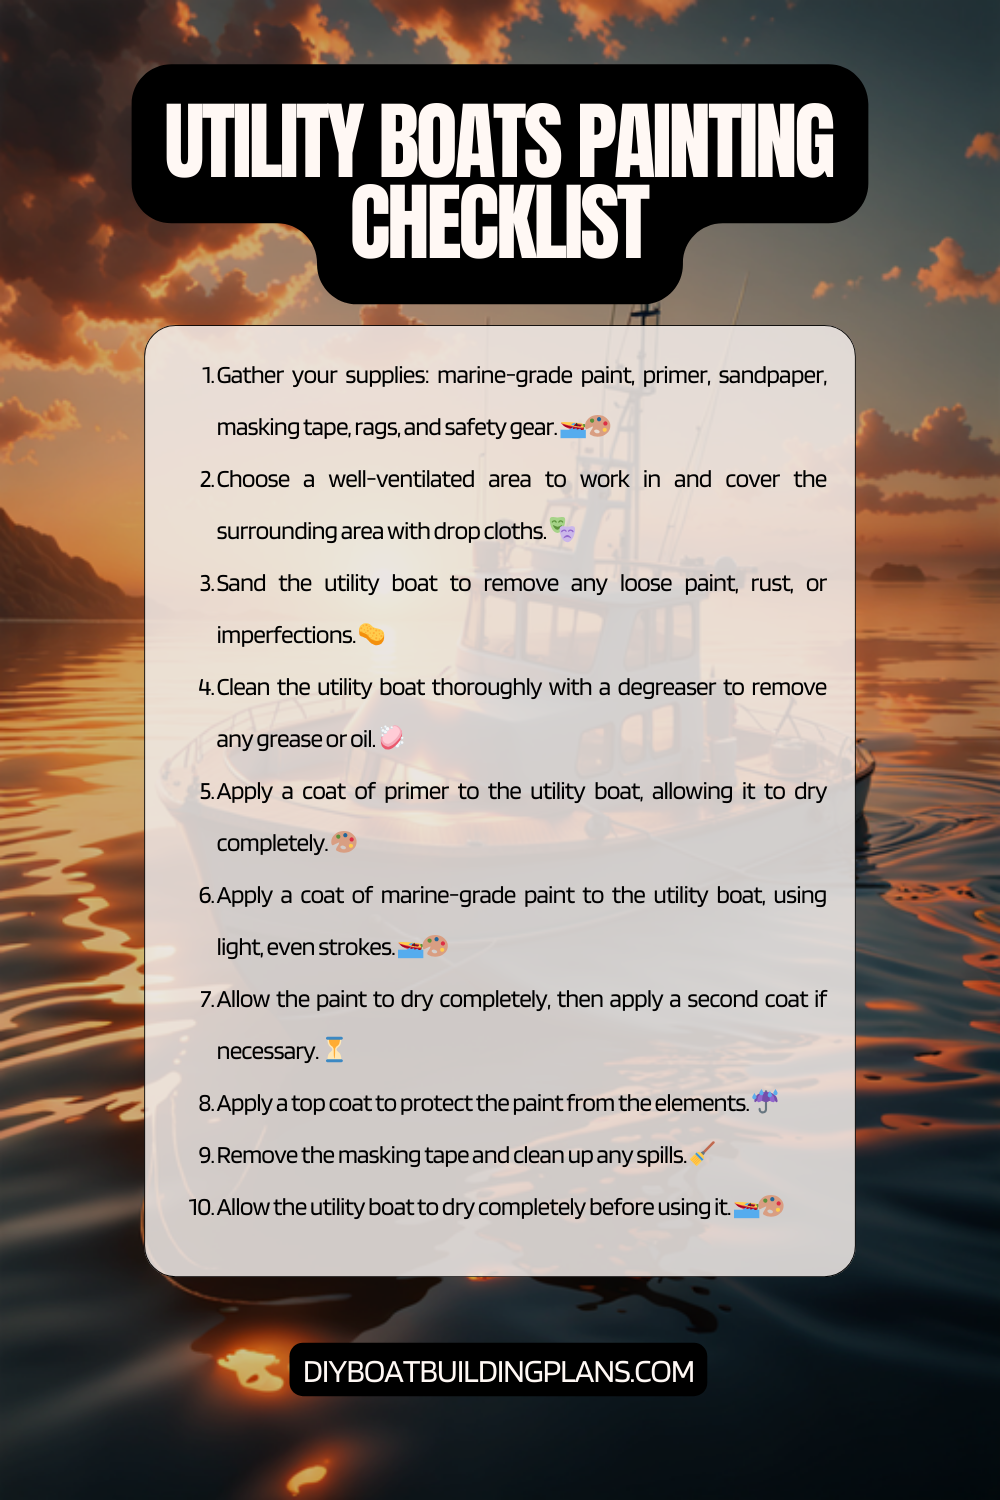 Utility Boats Painting Checklist